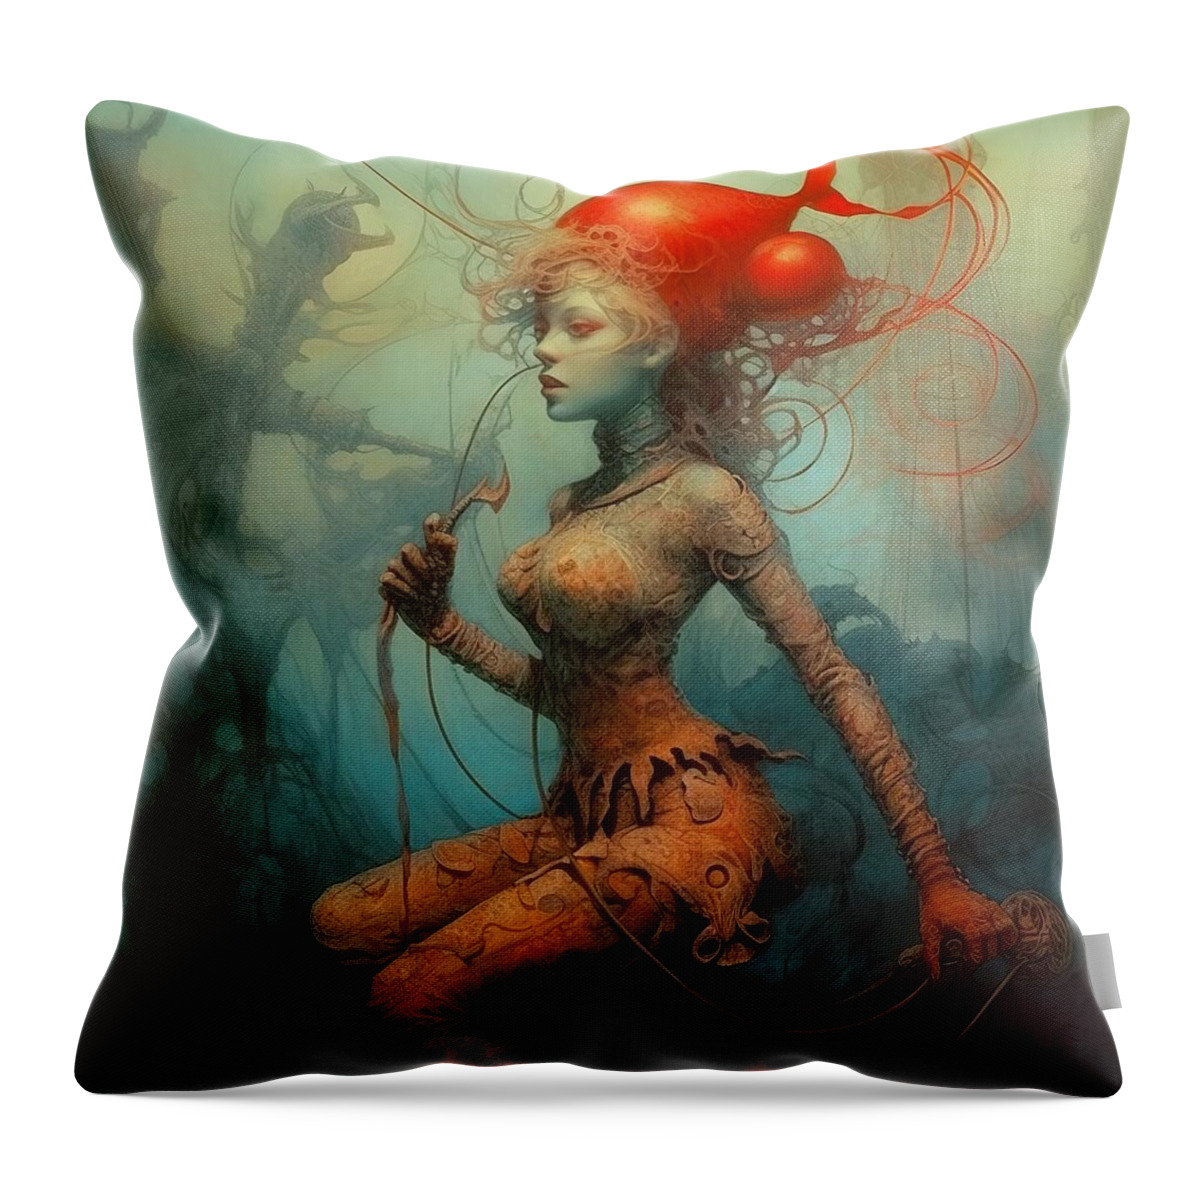 Girl Throw Pillow featuring the painting Busty Jester by My Head Cinema